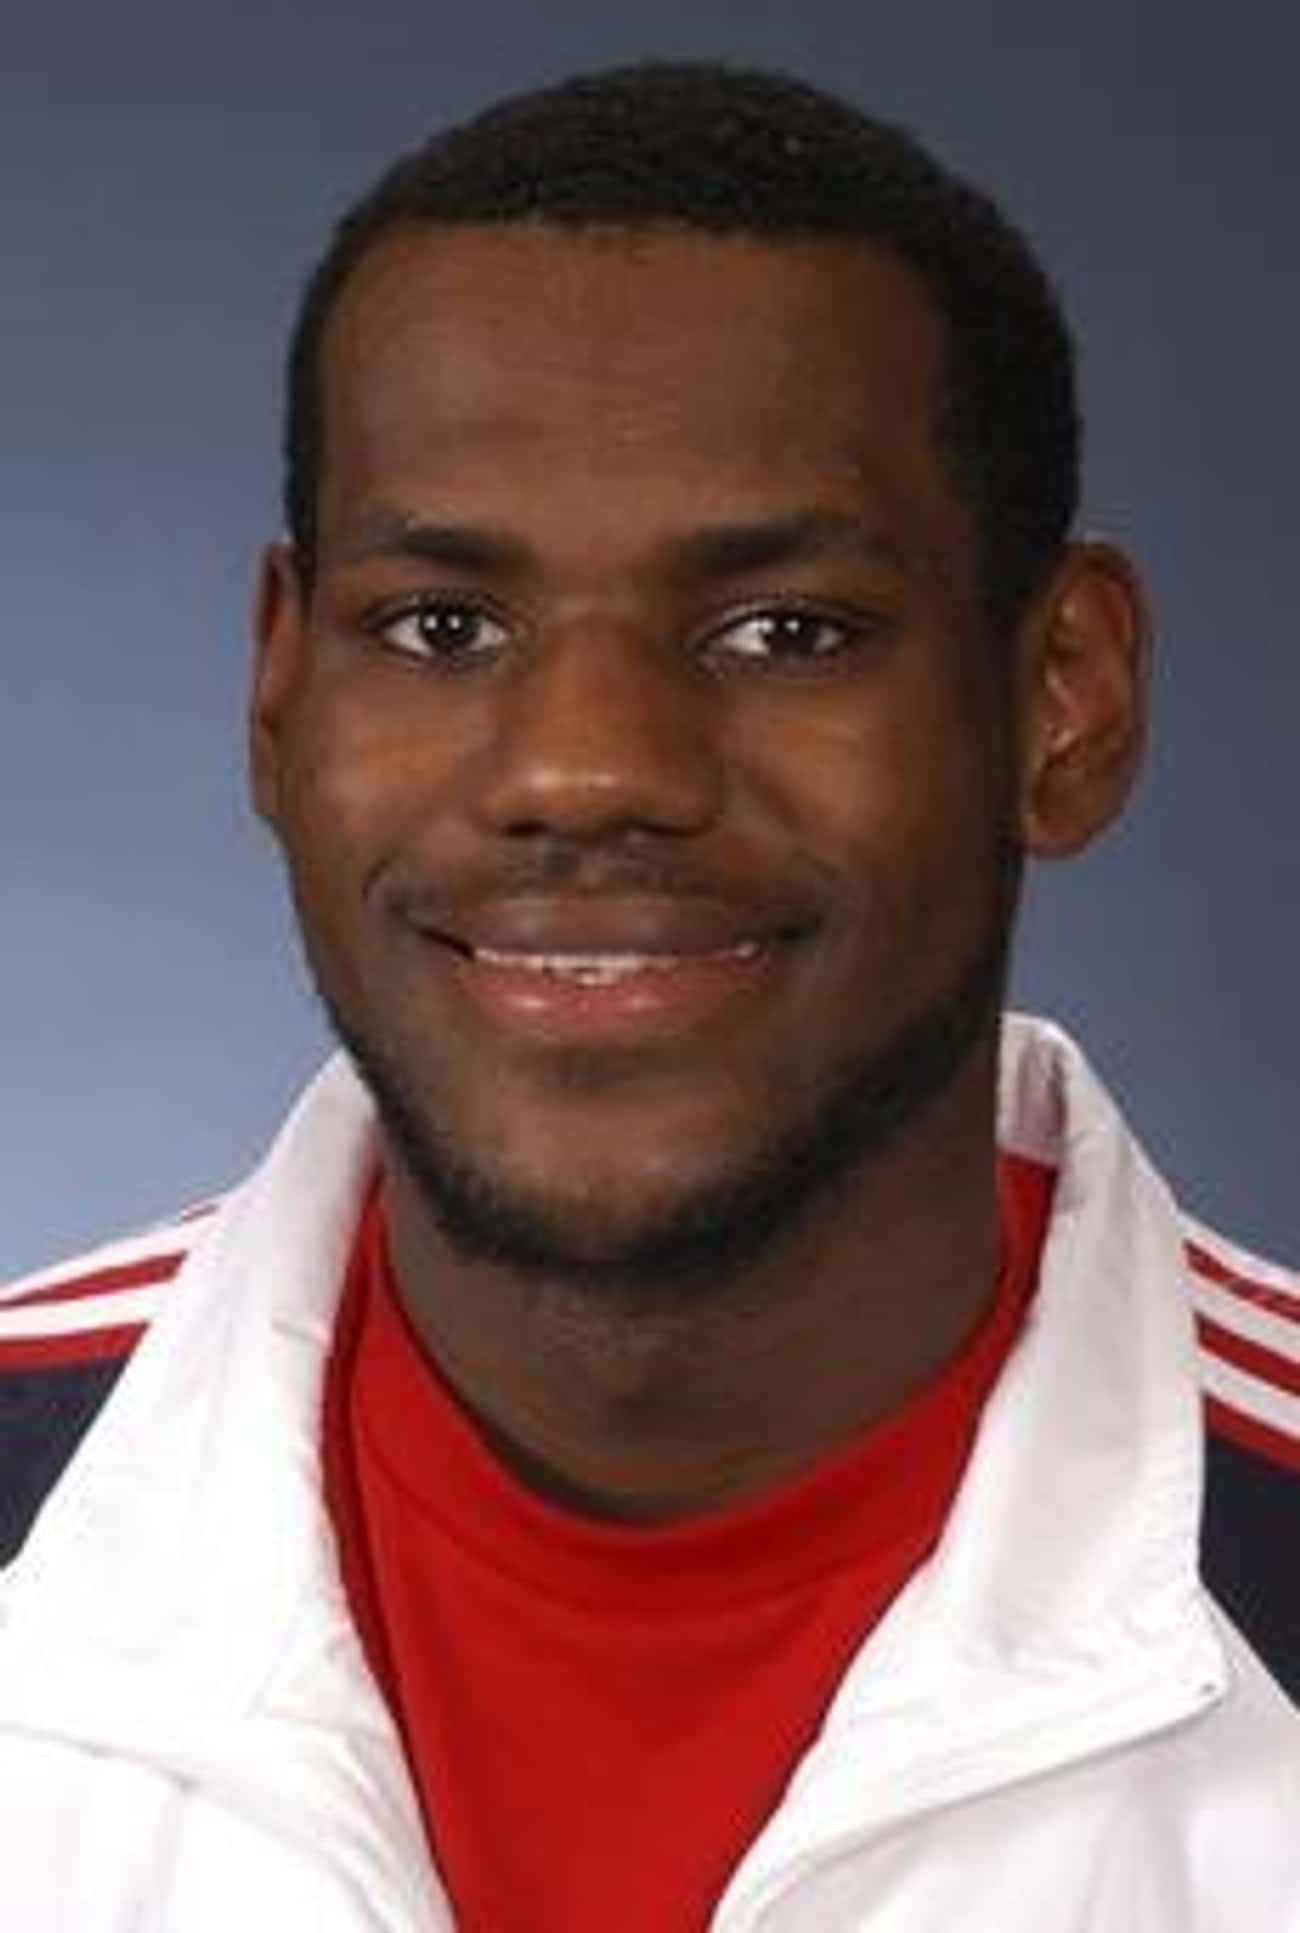 Young LeBron James in White Striped Jacket and Red T-Shirt